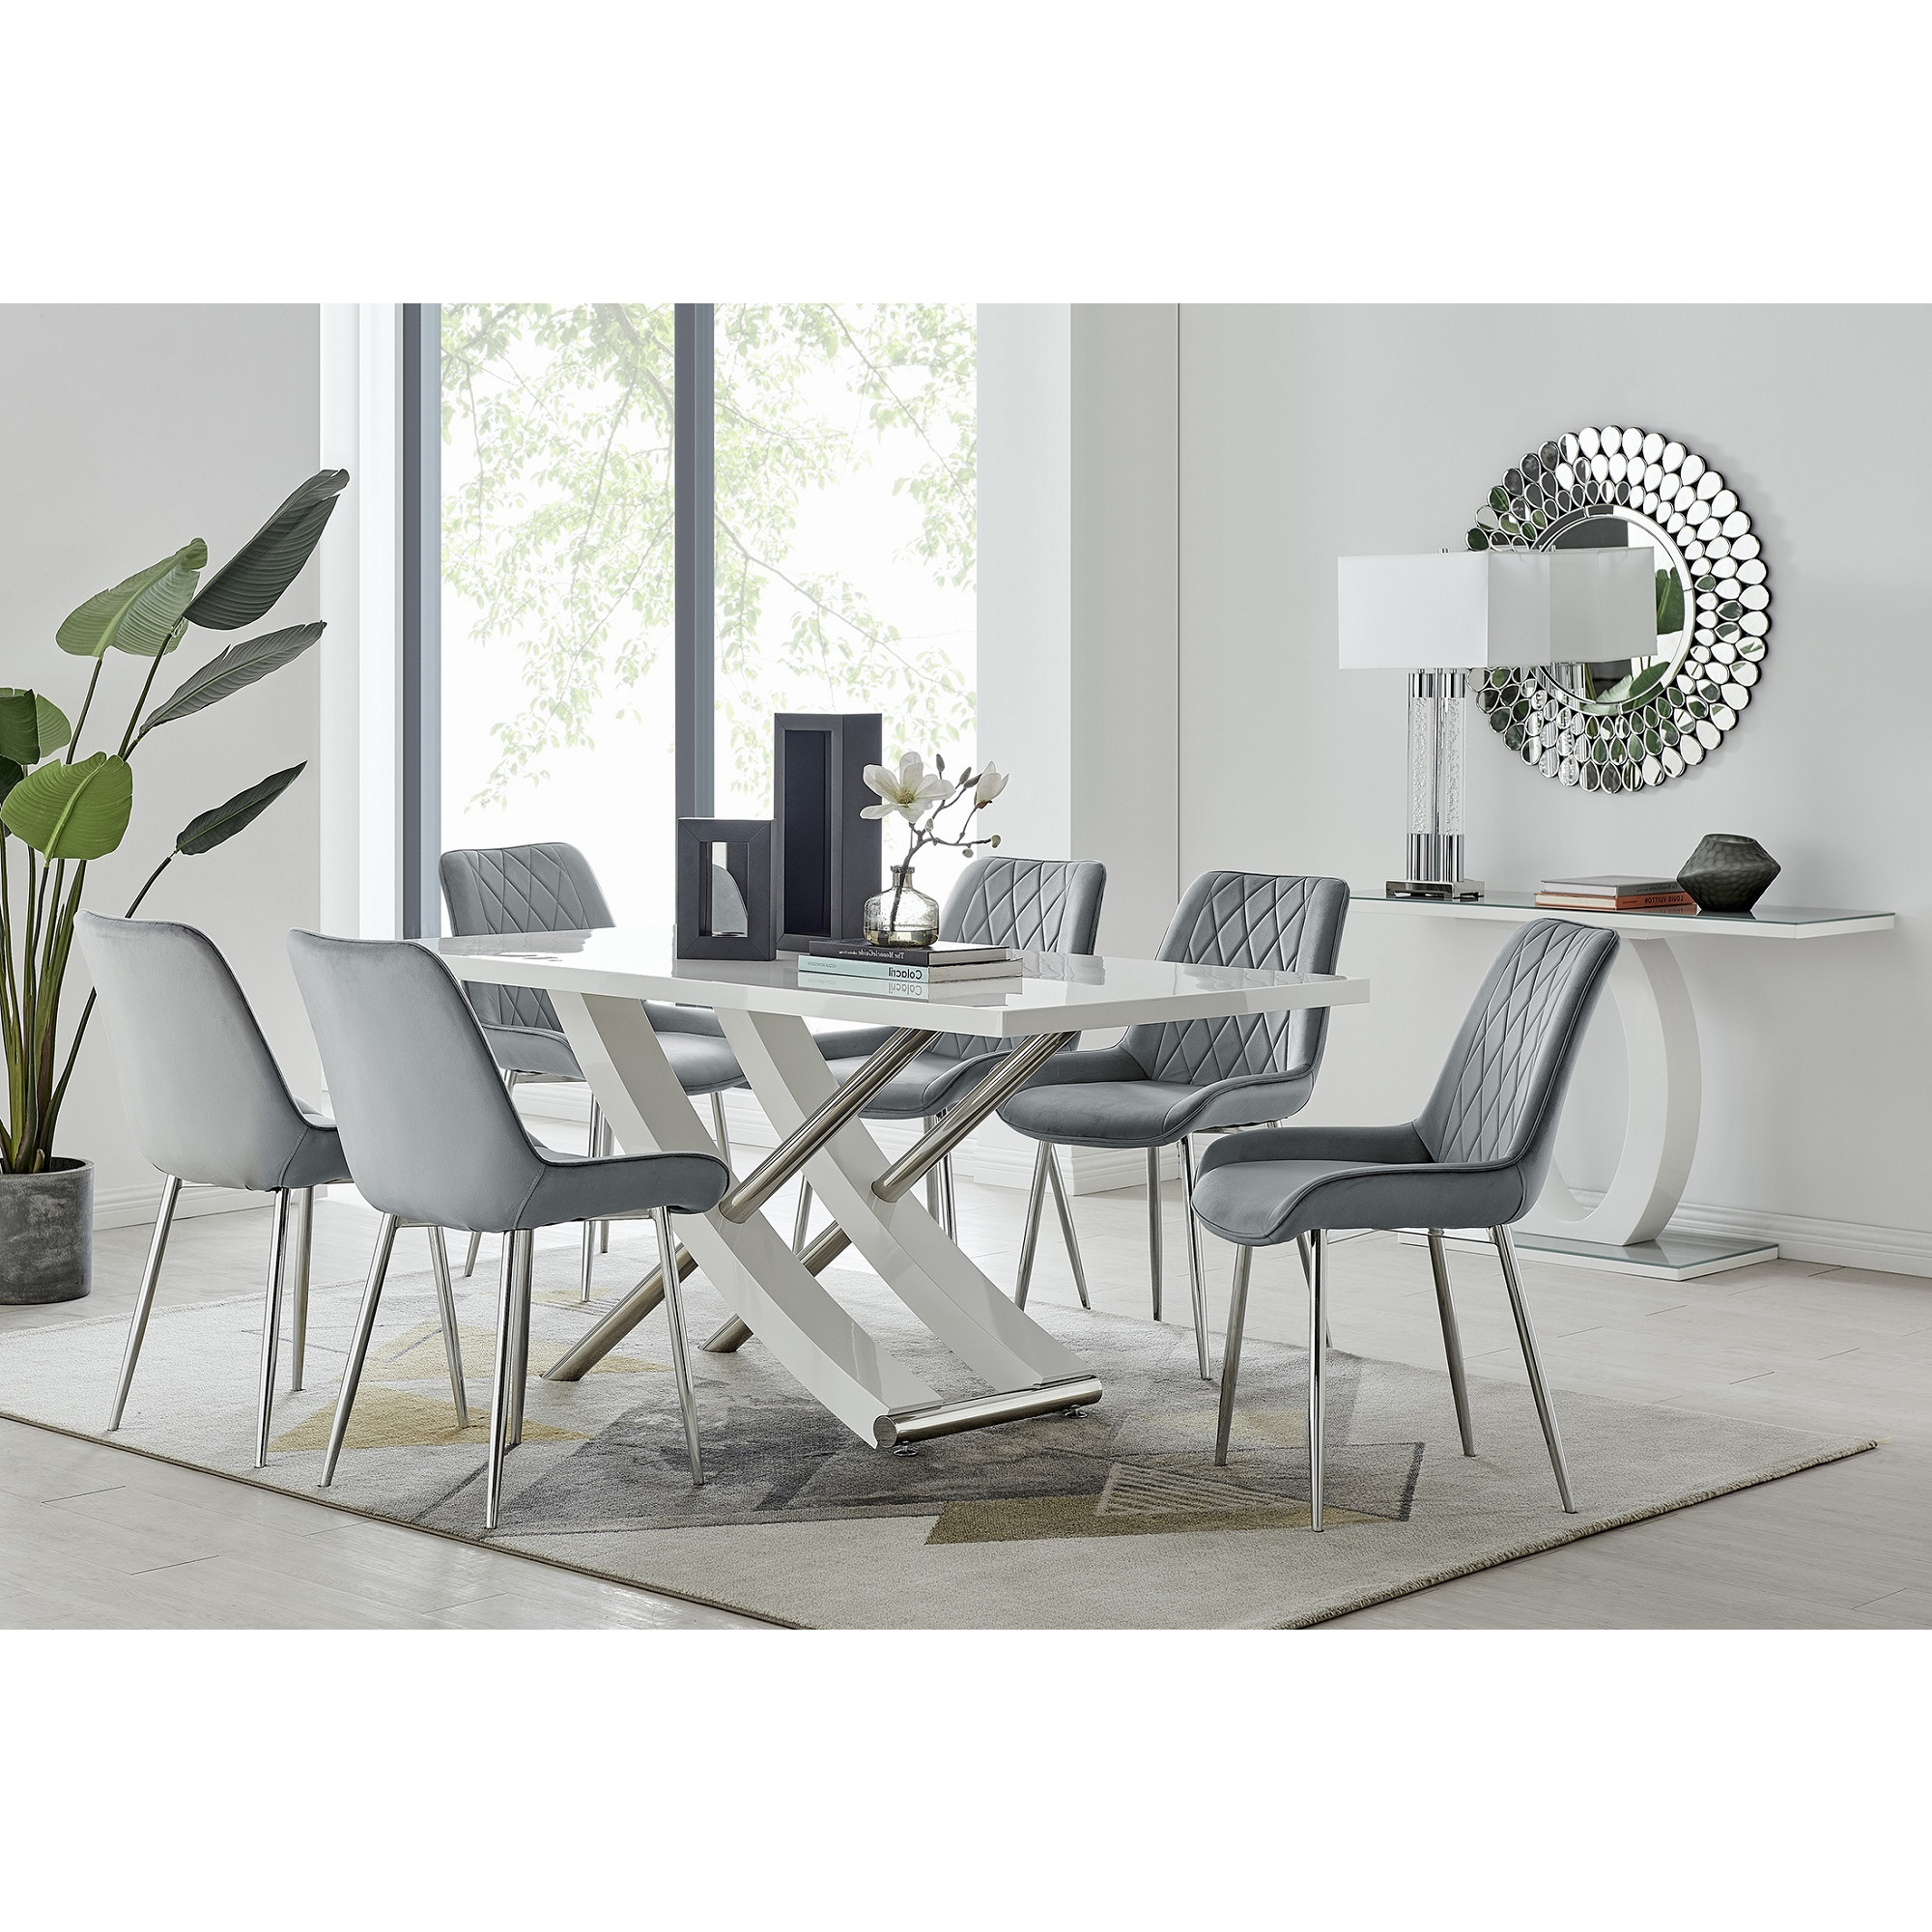 Mayfair 6 Dining Table and 6 Pesaro Silver Leg Chairs